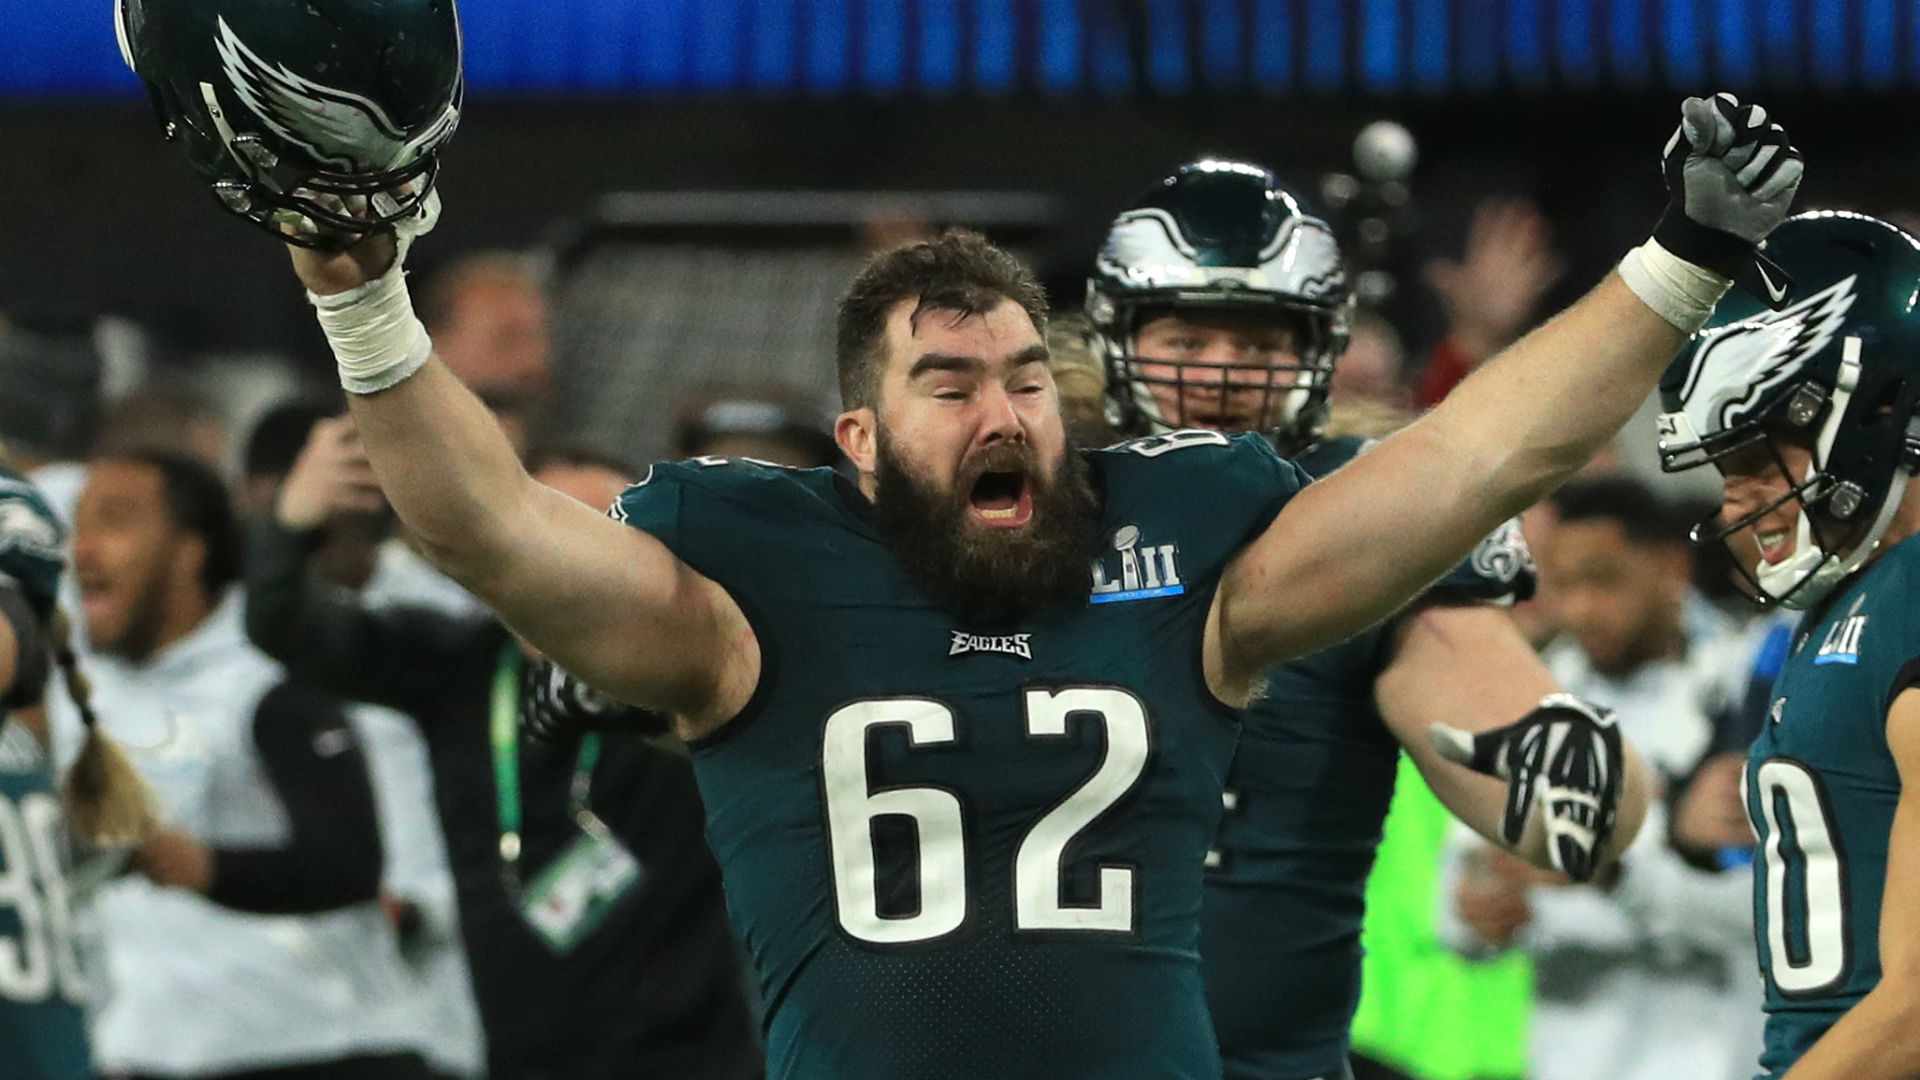 Eagles' Jason Kelce goes on epic rant, NFL Network goes silent | NFL | Sporting News